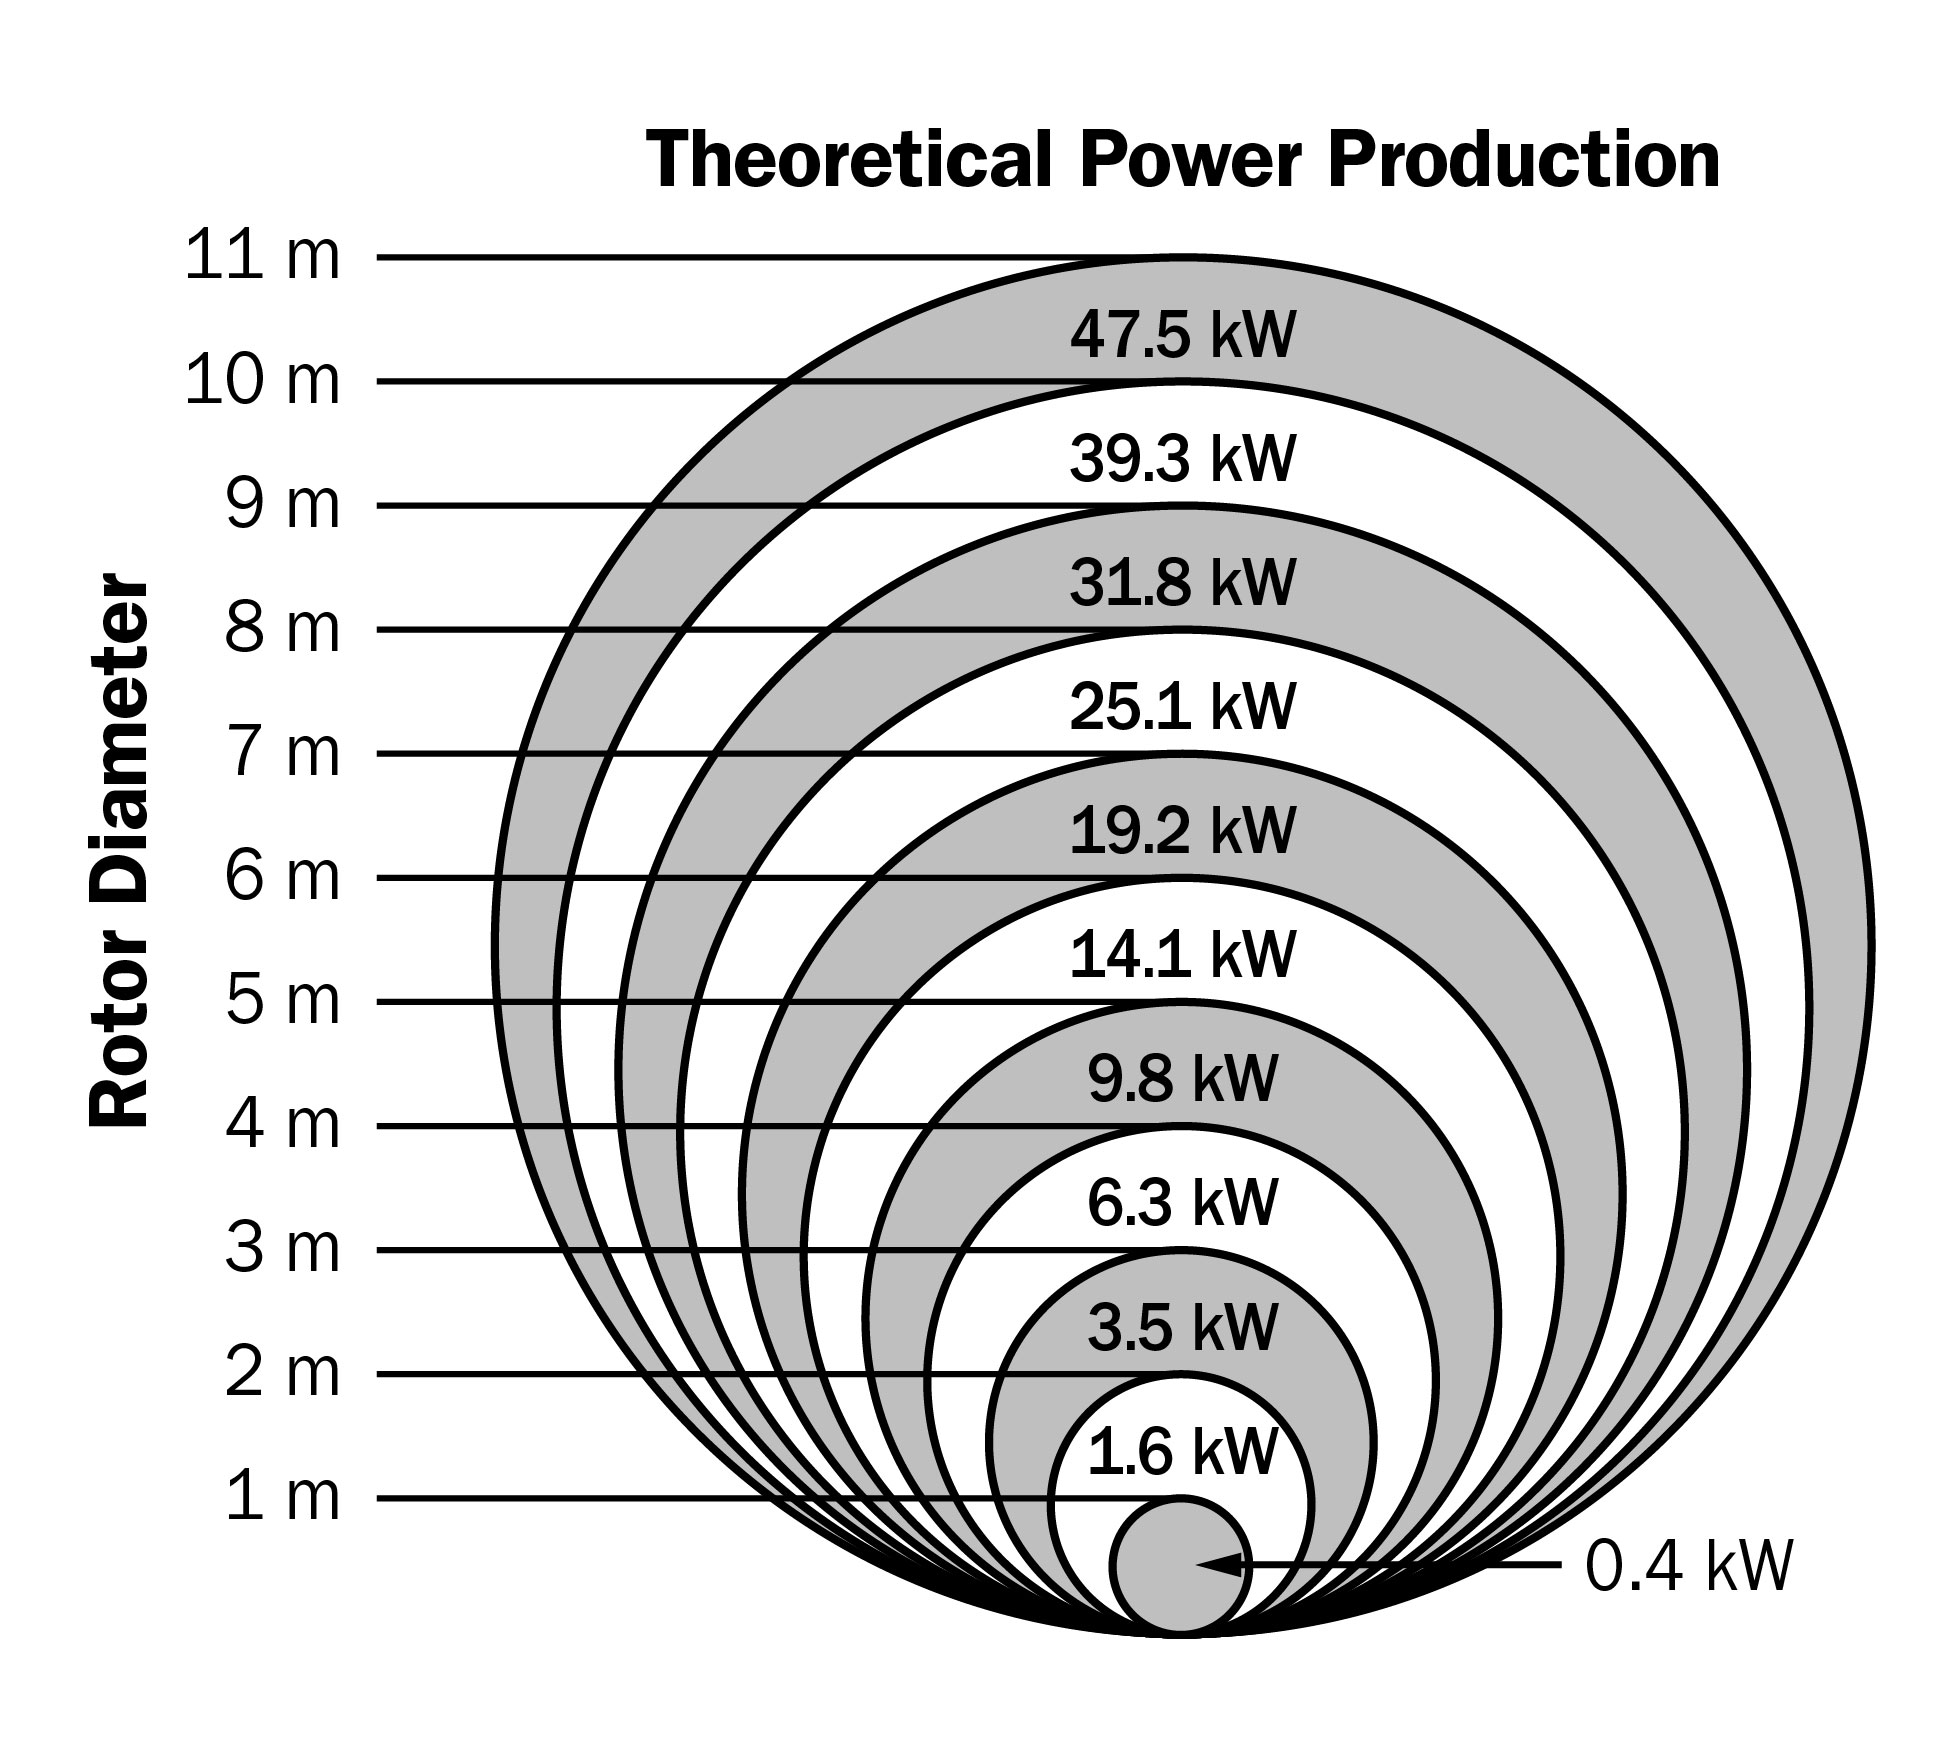 Theoretical power production is dependent on the rotor diameter for small wind turbines when the wind speed is 10 meters per second